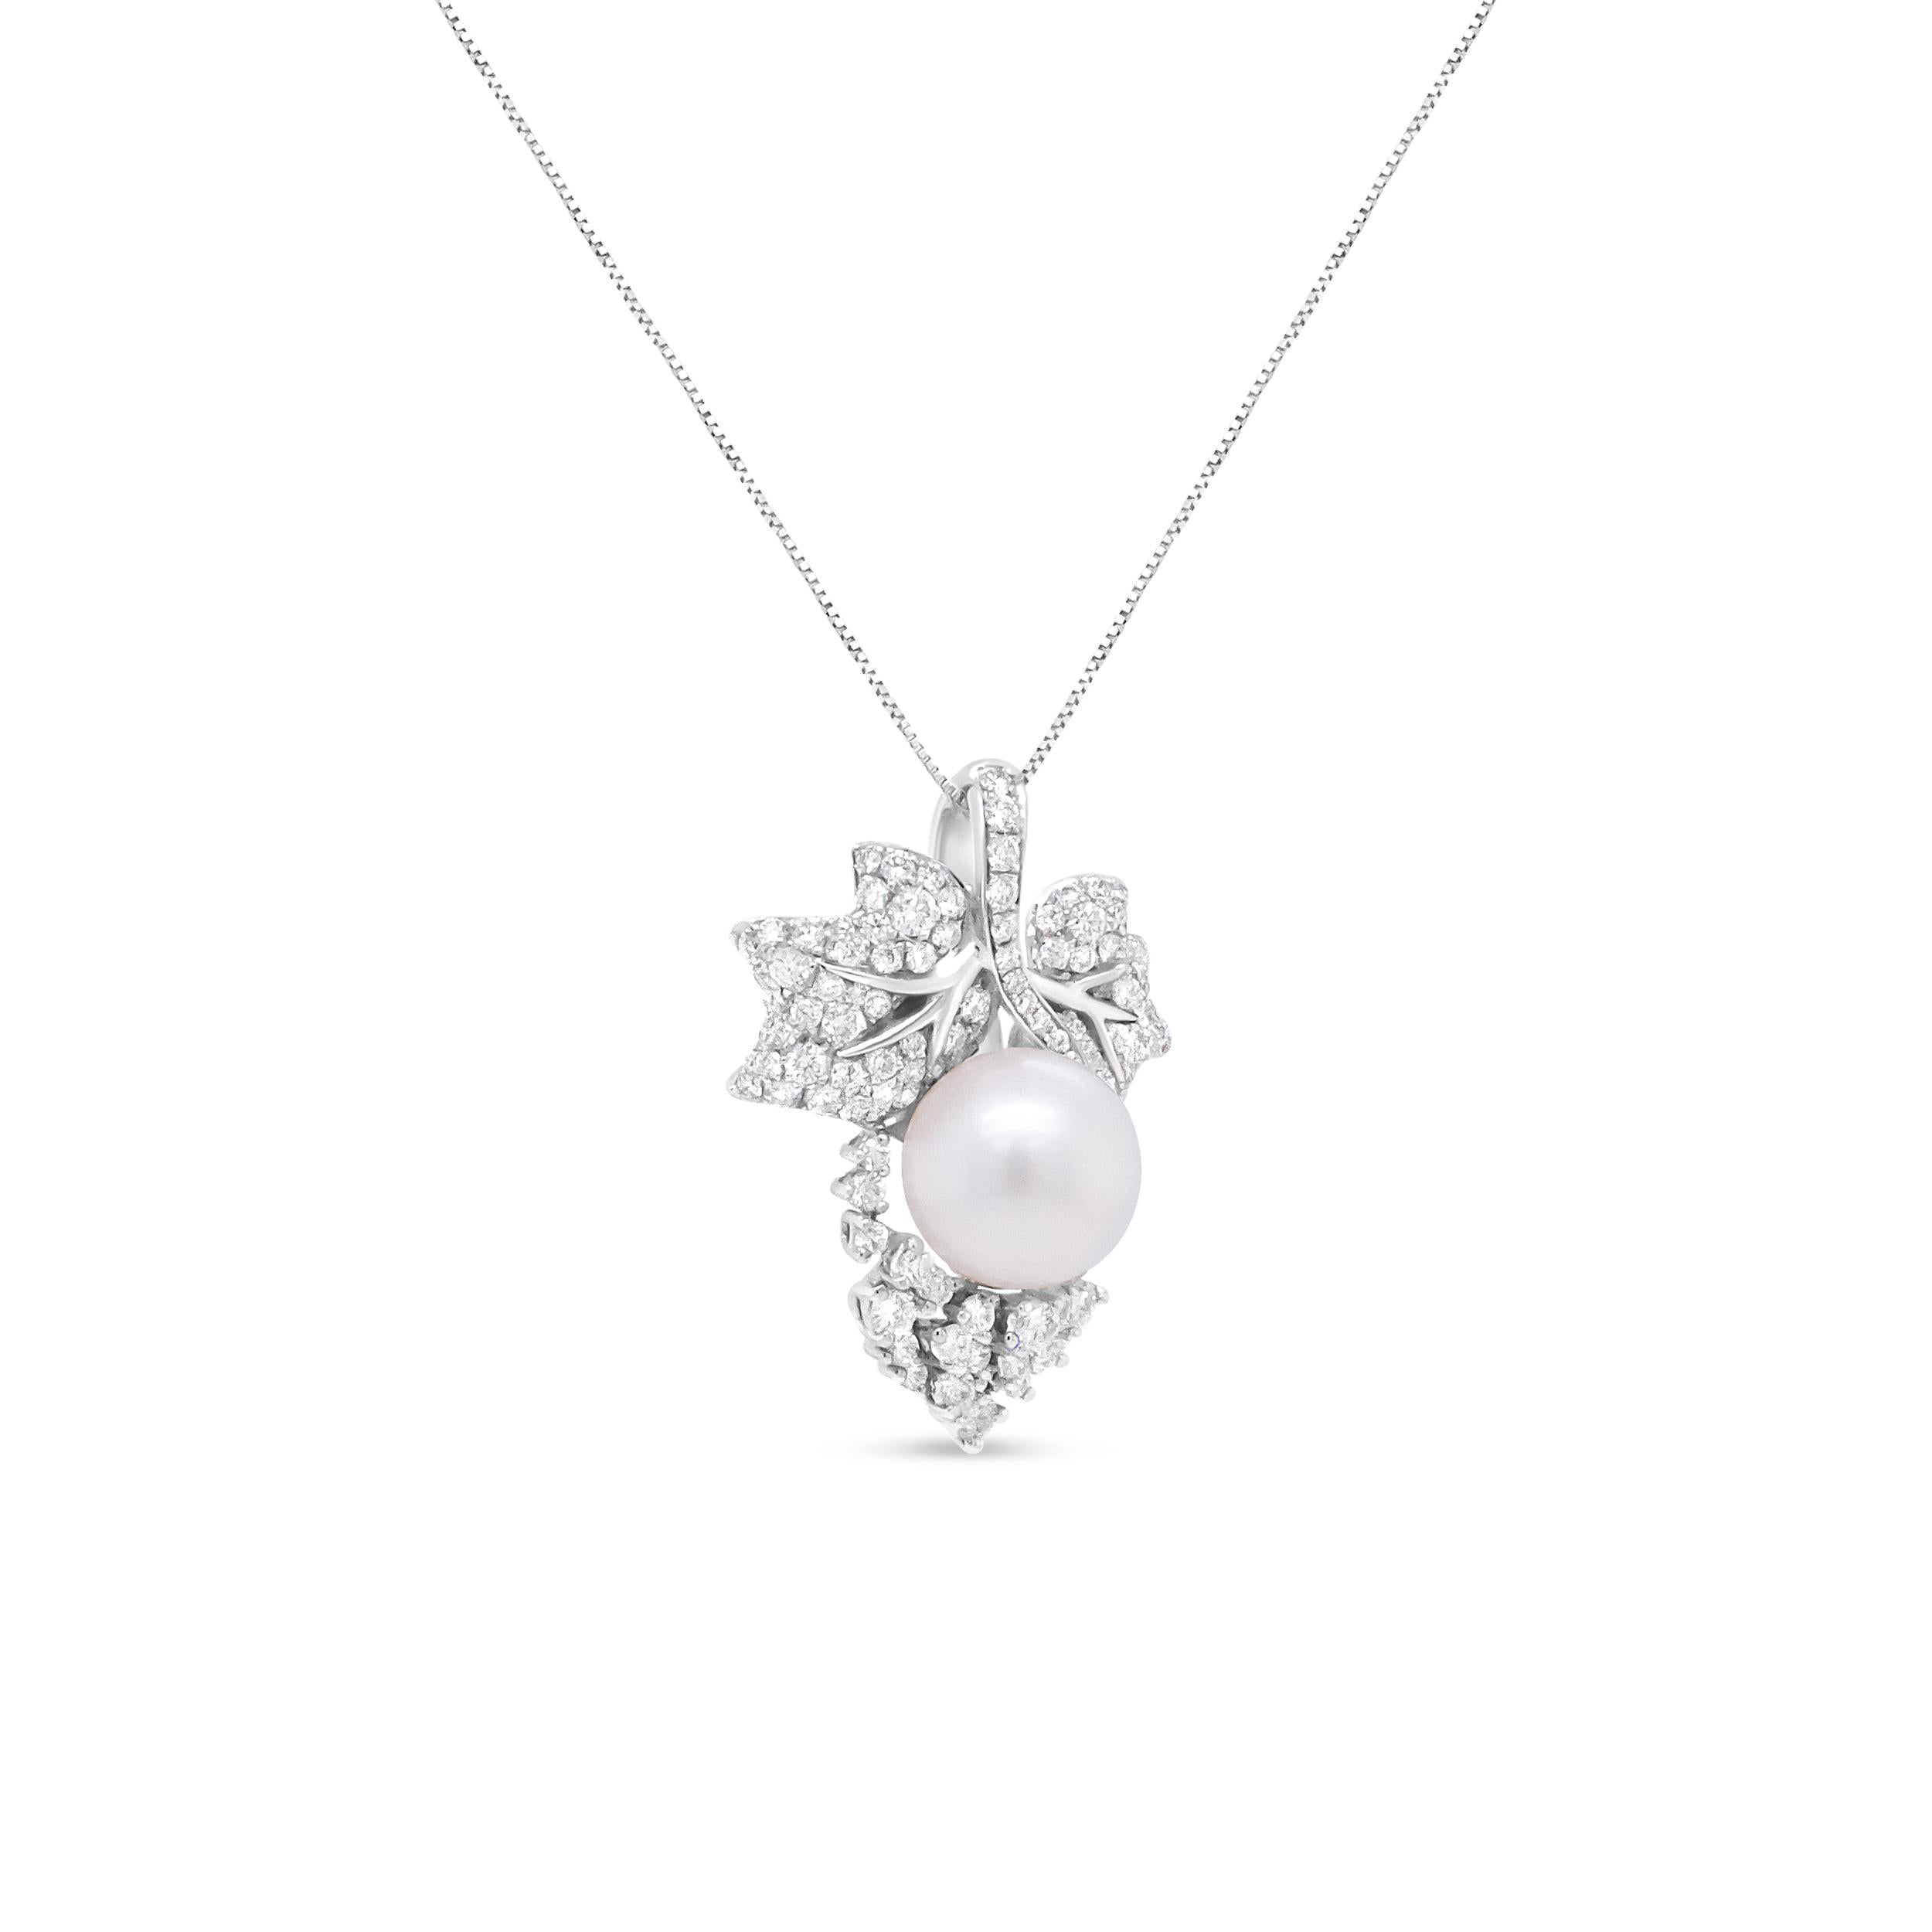 A romantic look that gives off the illusion of old school glamour, this 18k white gold is a head turner. A beautifully crafted 10 MM cultured pearl sits at the center of this glamorous beauty and is adorned on a leaf-like motif embellished with